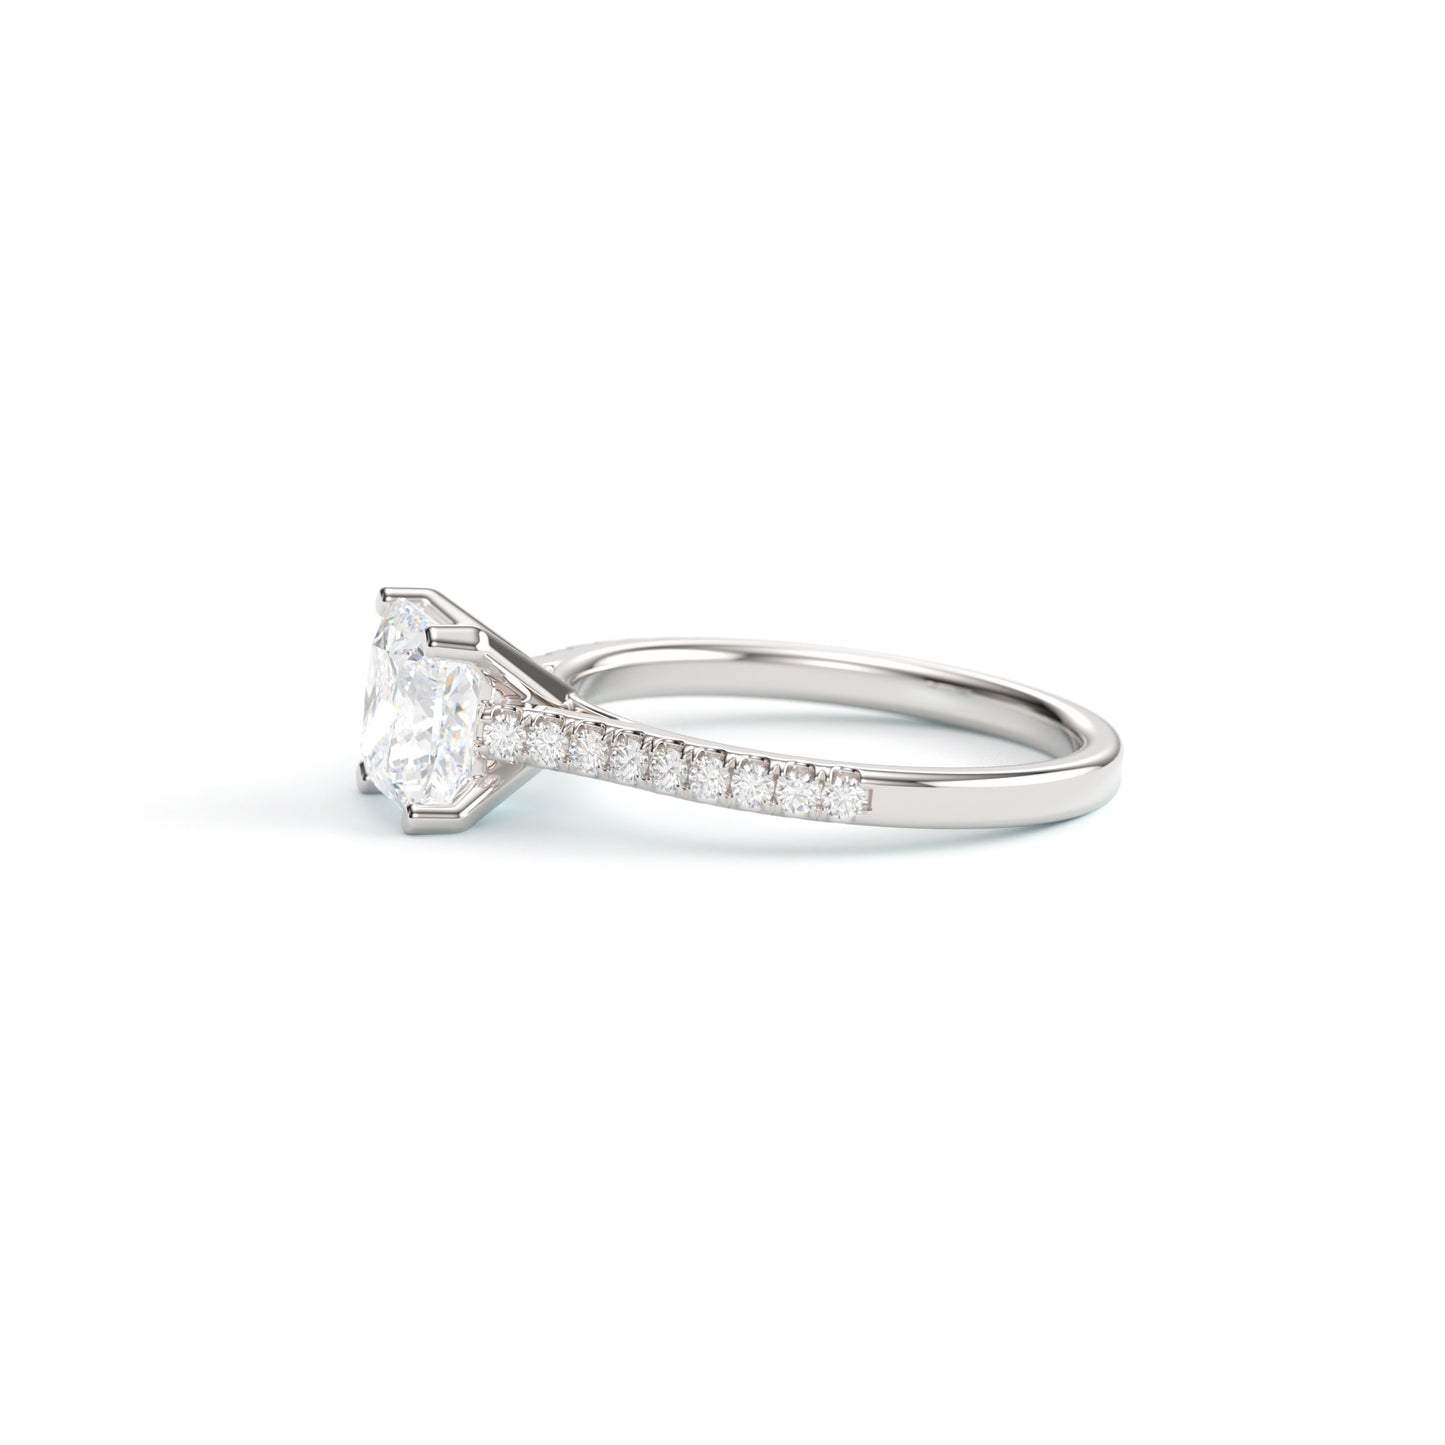 Princess Solitaire on a Classic Pave Diamond Band.